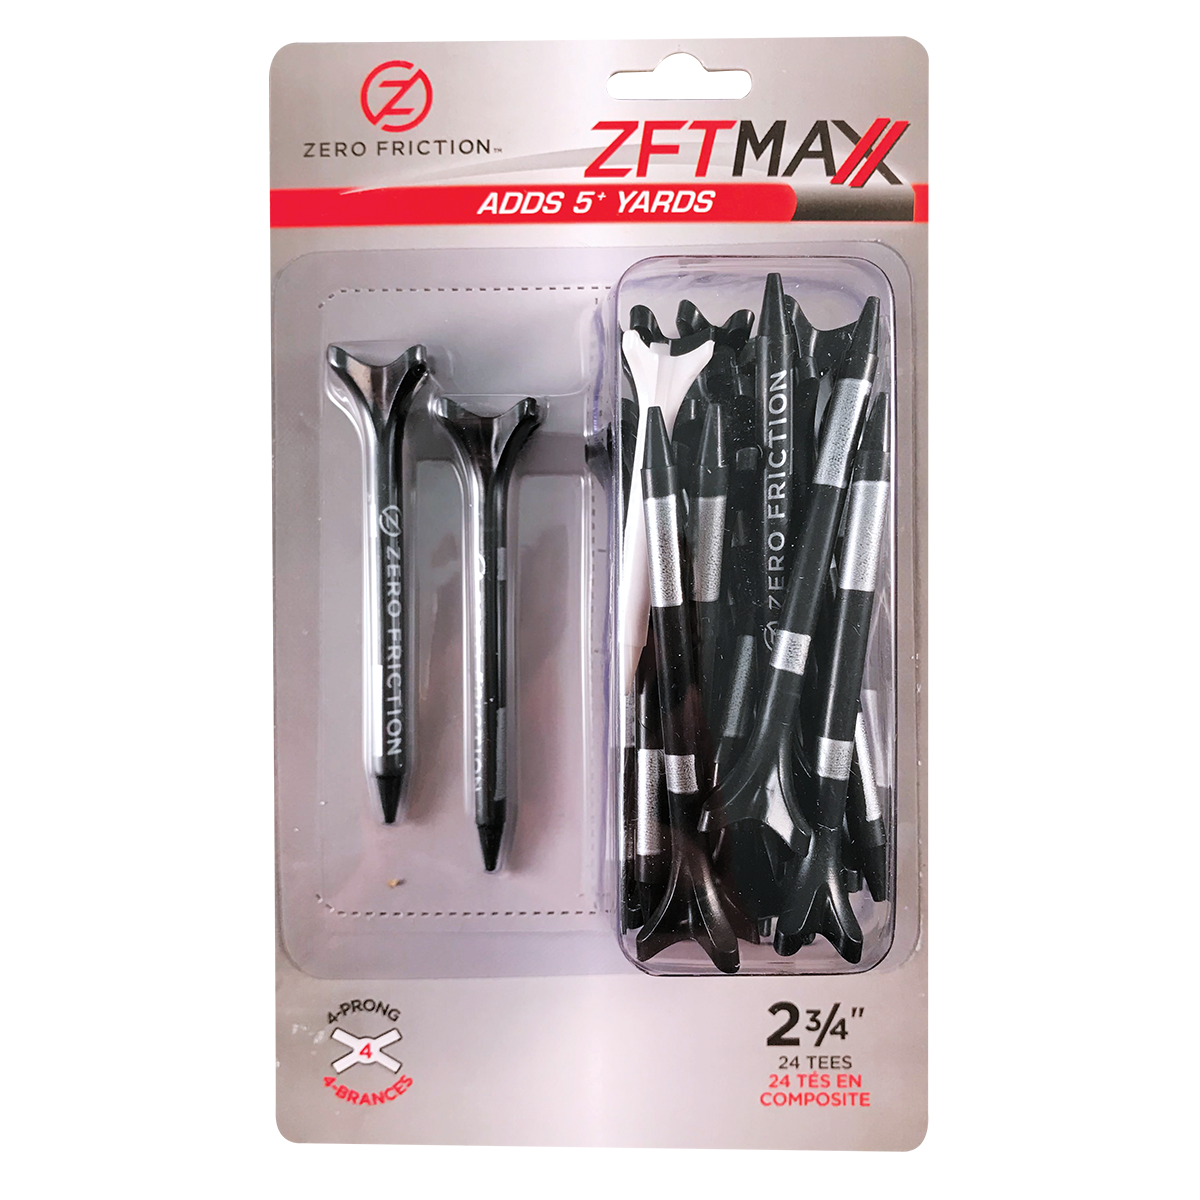 ZF MAXX 4-PRONG 2-3/4" TEES - 24 PACK